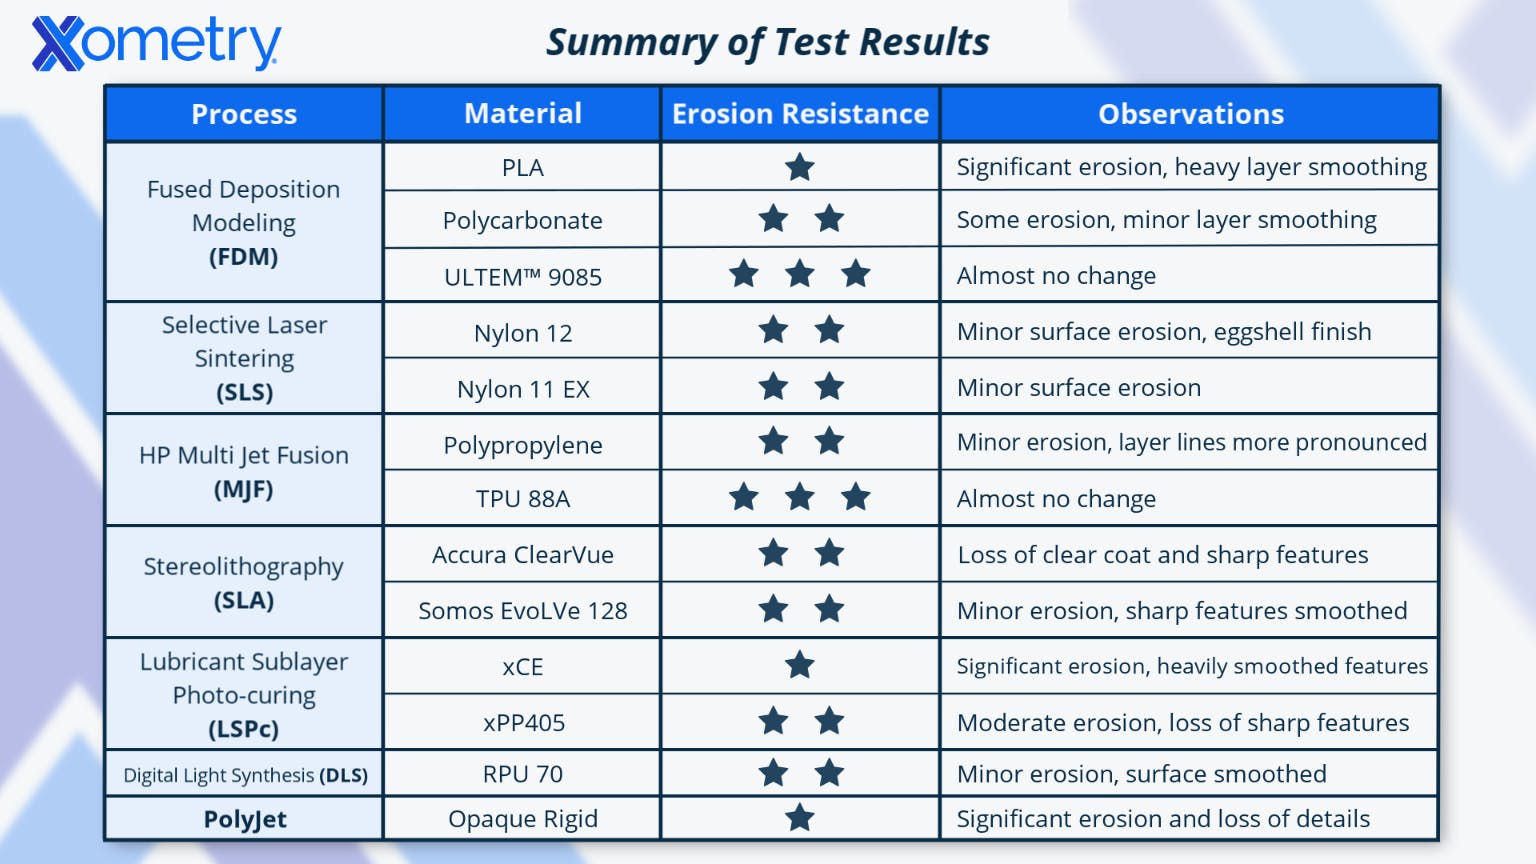 Xometry erosion resistance test results